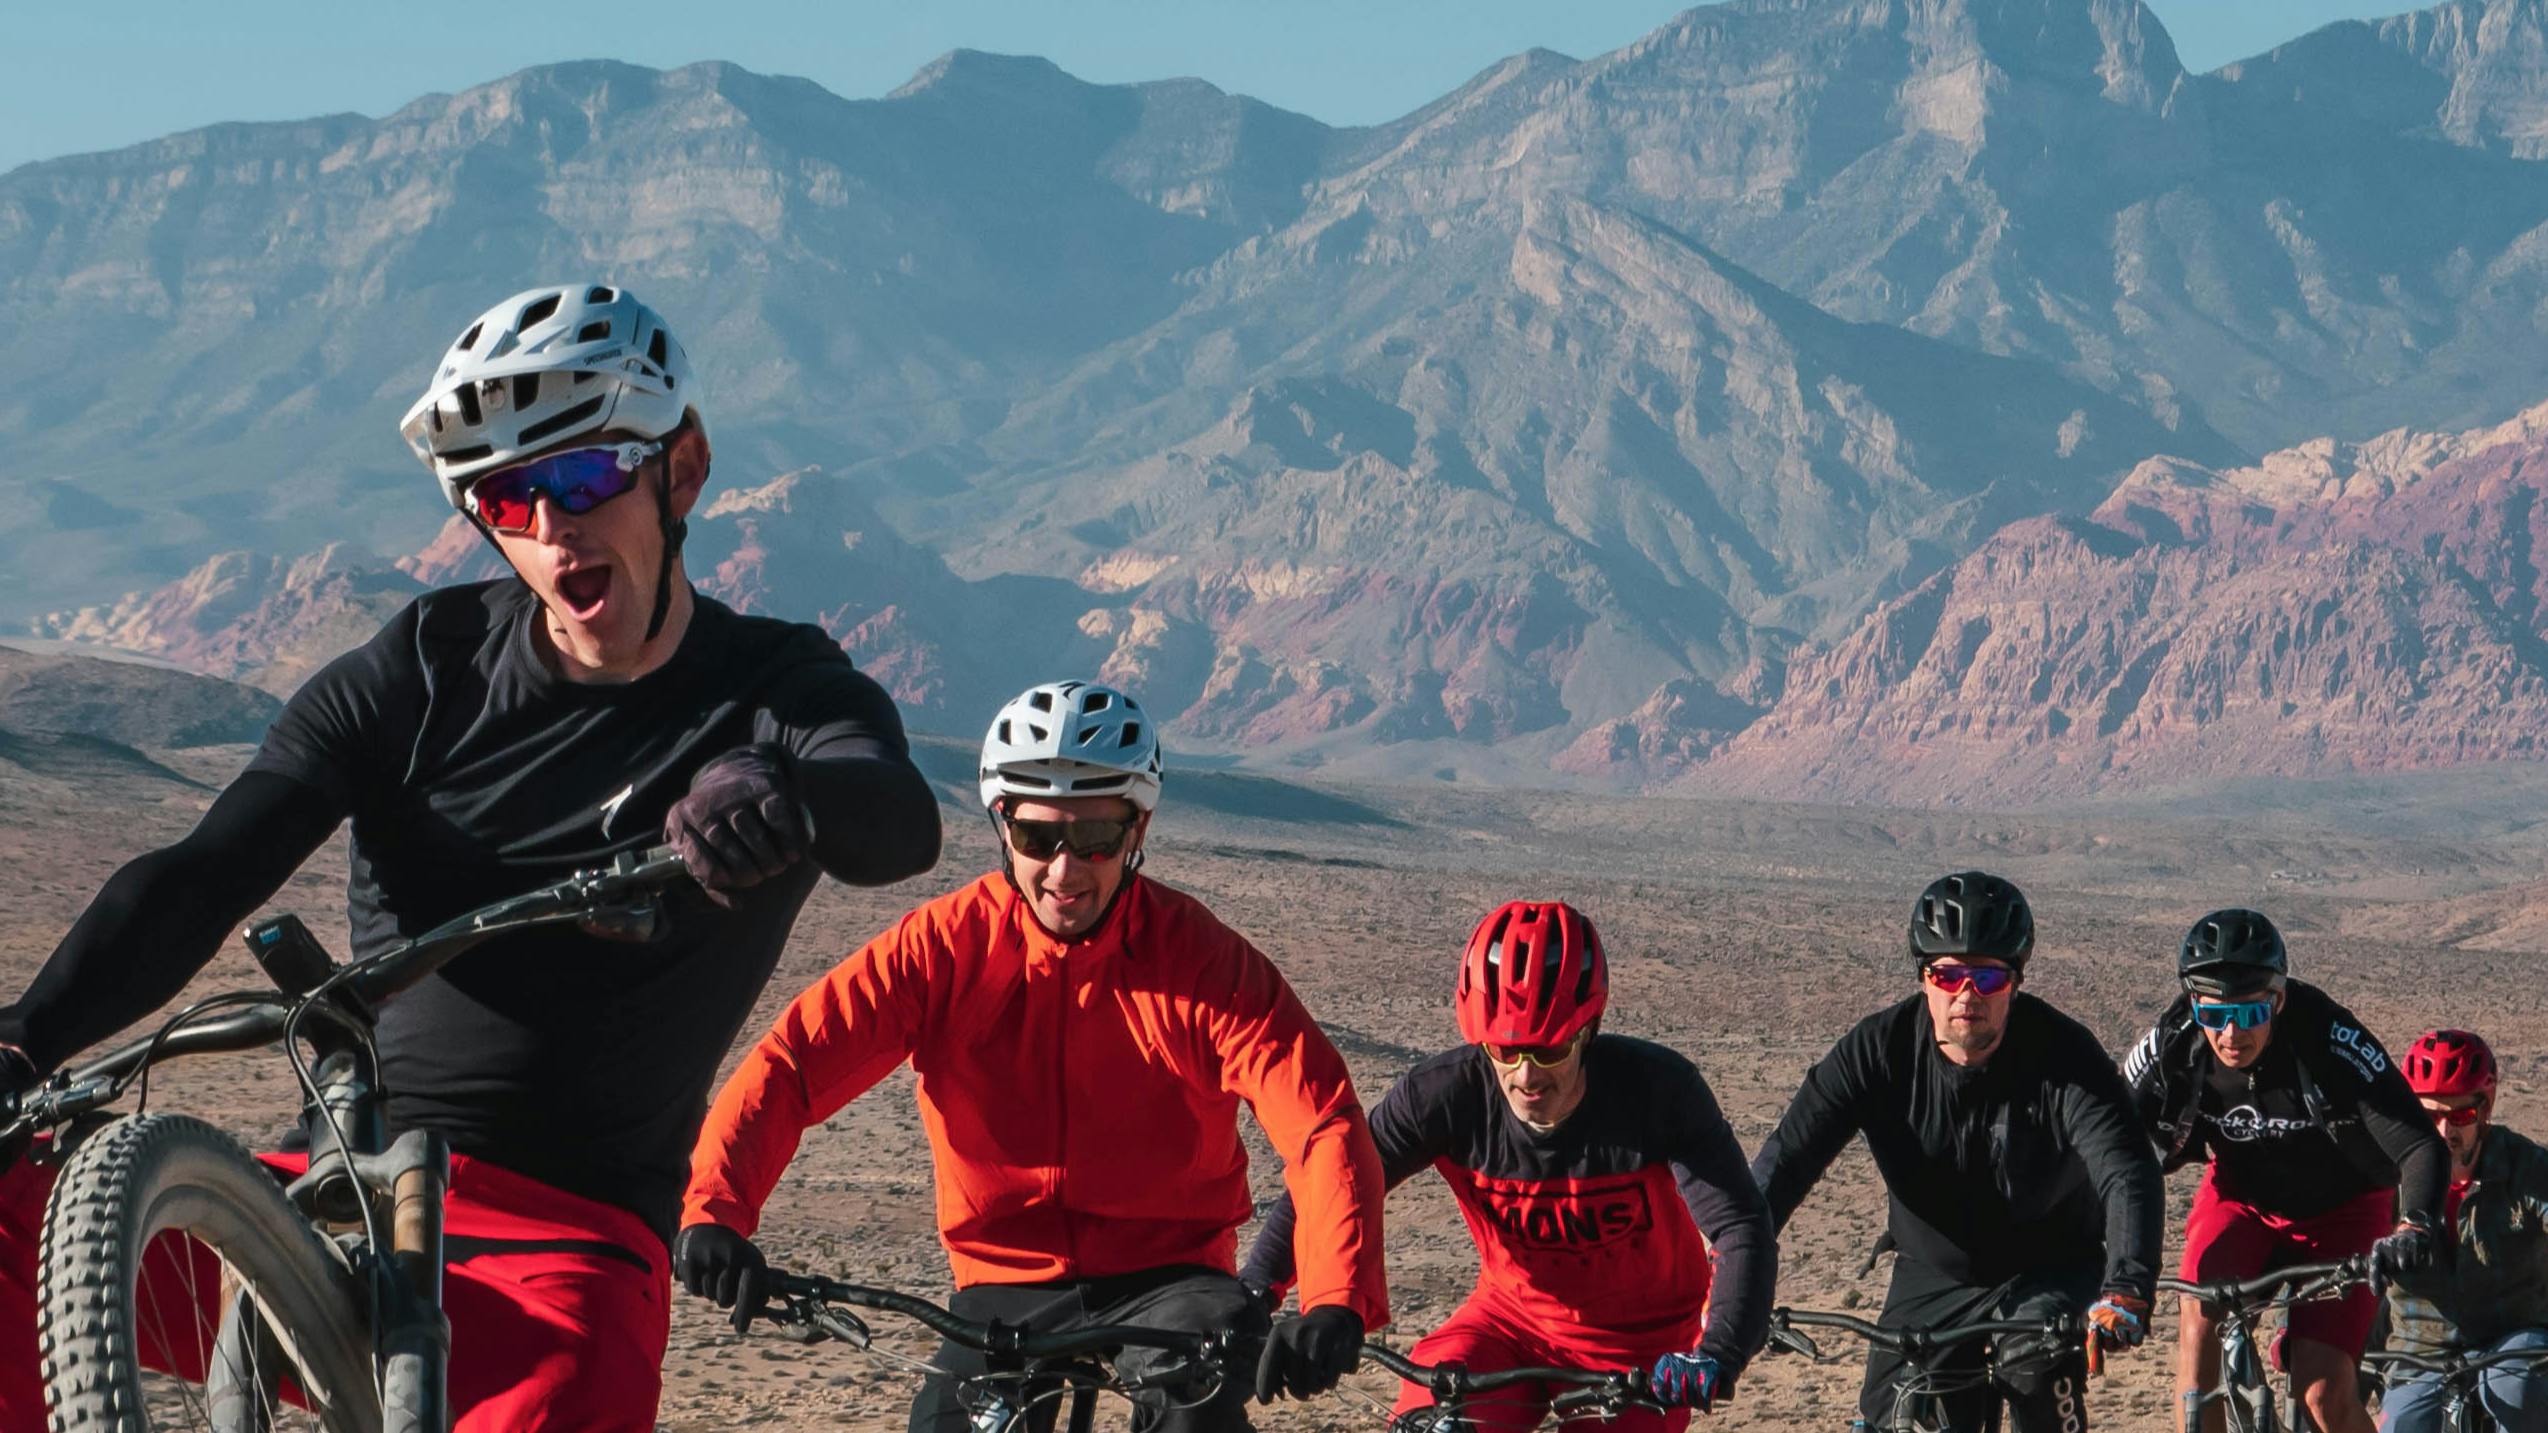 Specialized General Manager Sam Benedict mountain biking and leading a group of five other friends on mountain bikes down a desert path with beautiful, red-tinged mountains in the distance.